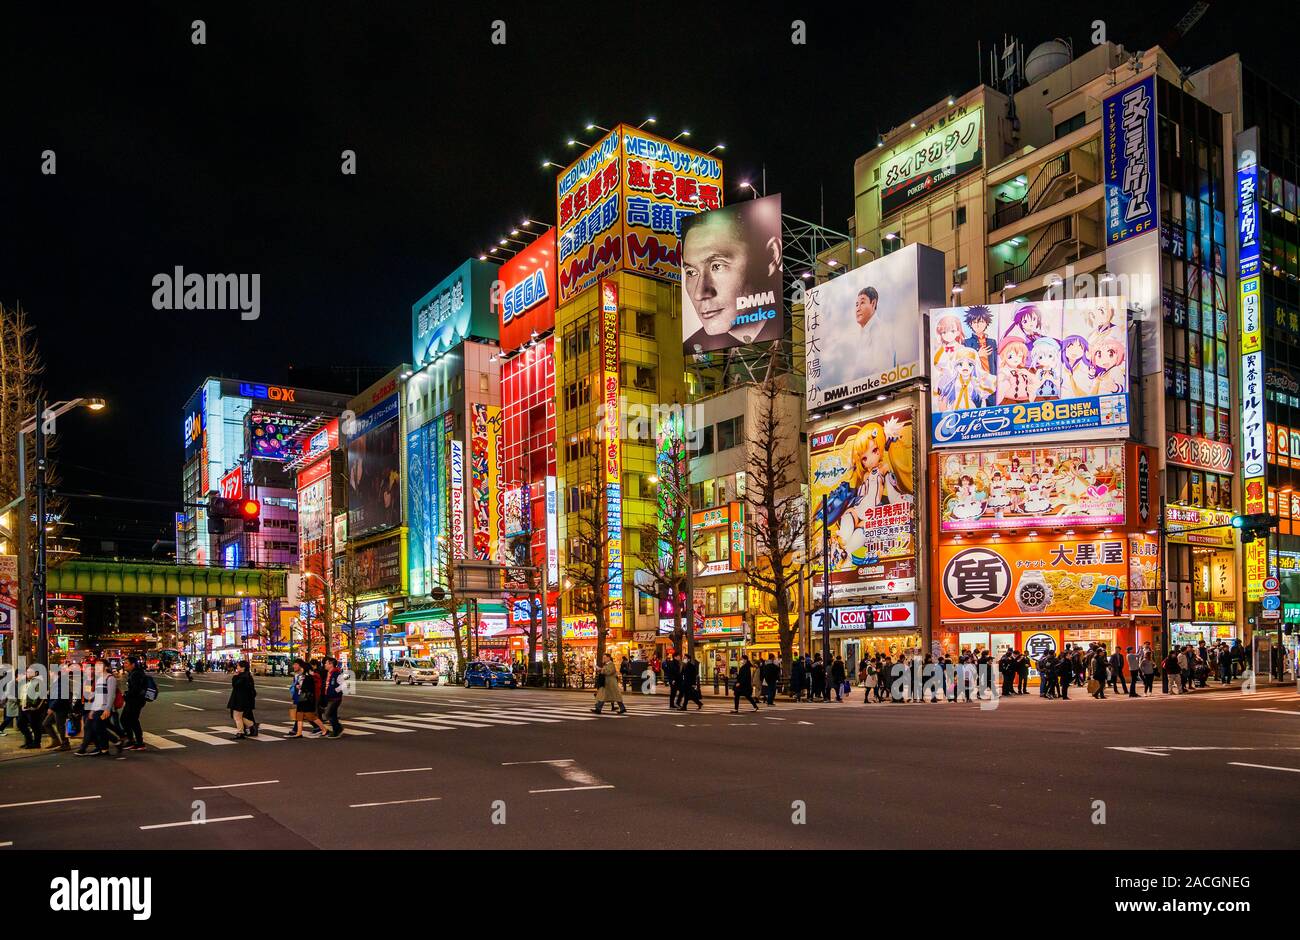 Tokyo city lights. Akihabara Electric Town at night, knows for shops dedicated to anime, manga, videogames and other products of Japanese otaku cultur Stock Photo